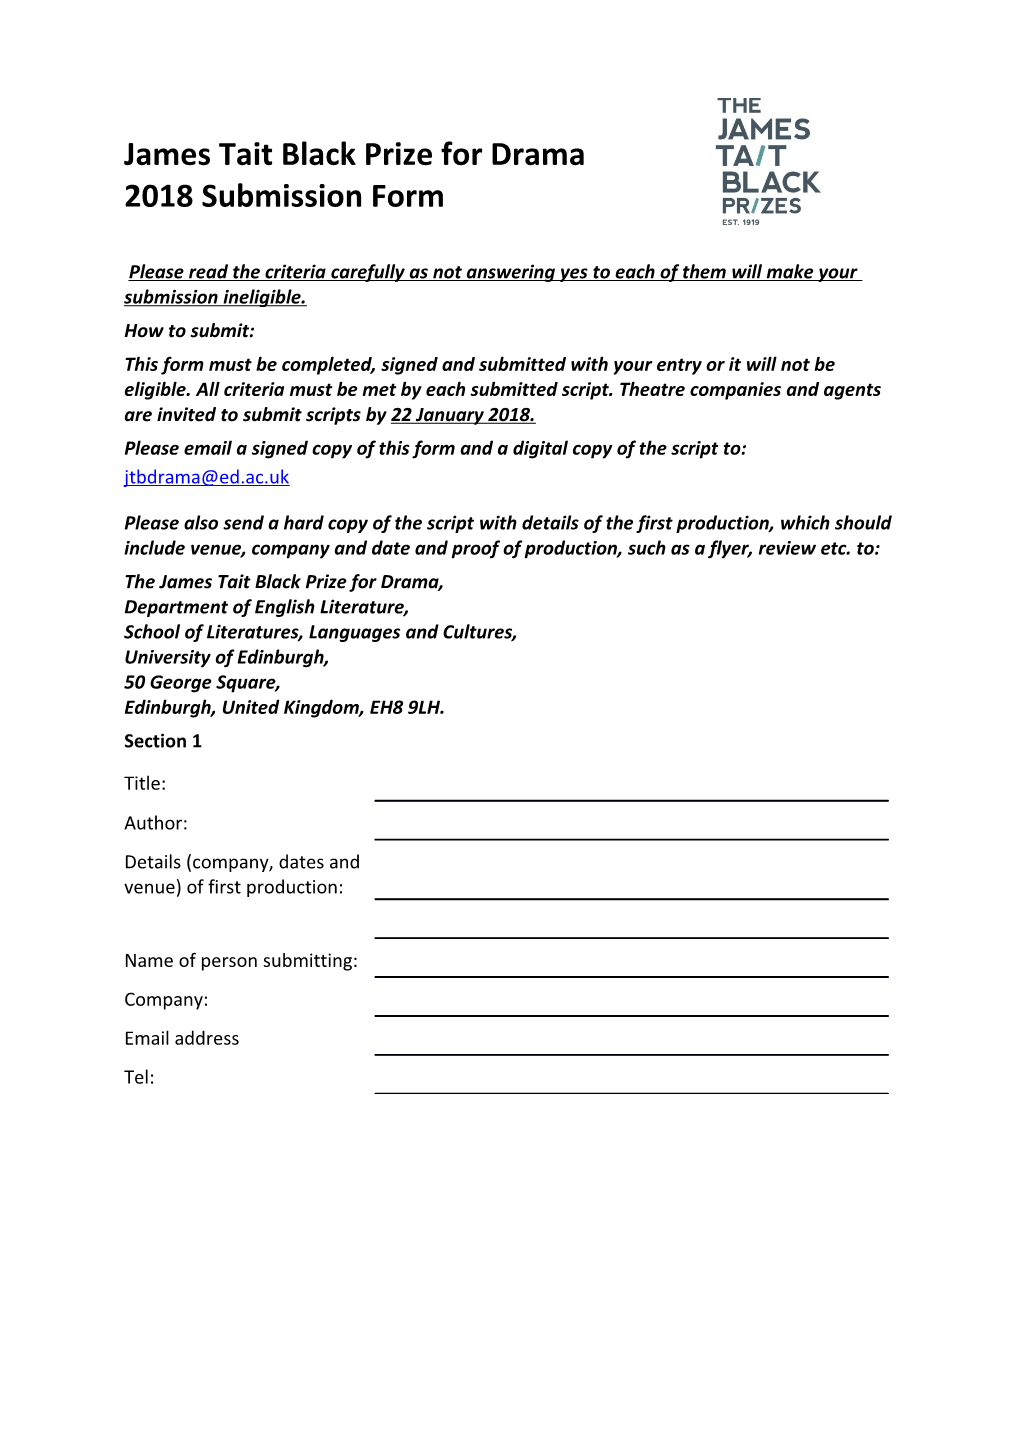 Please Email a Signed Copy of This Form and a Digital Copy of the Script To